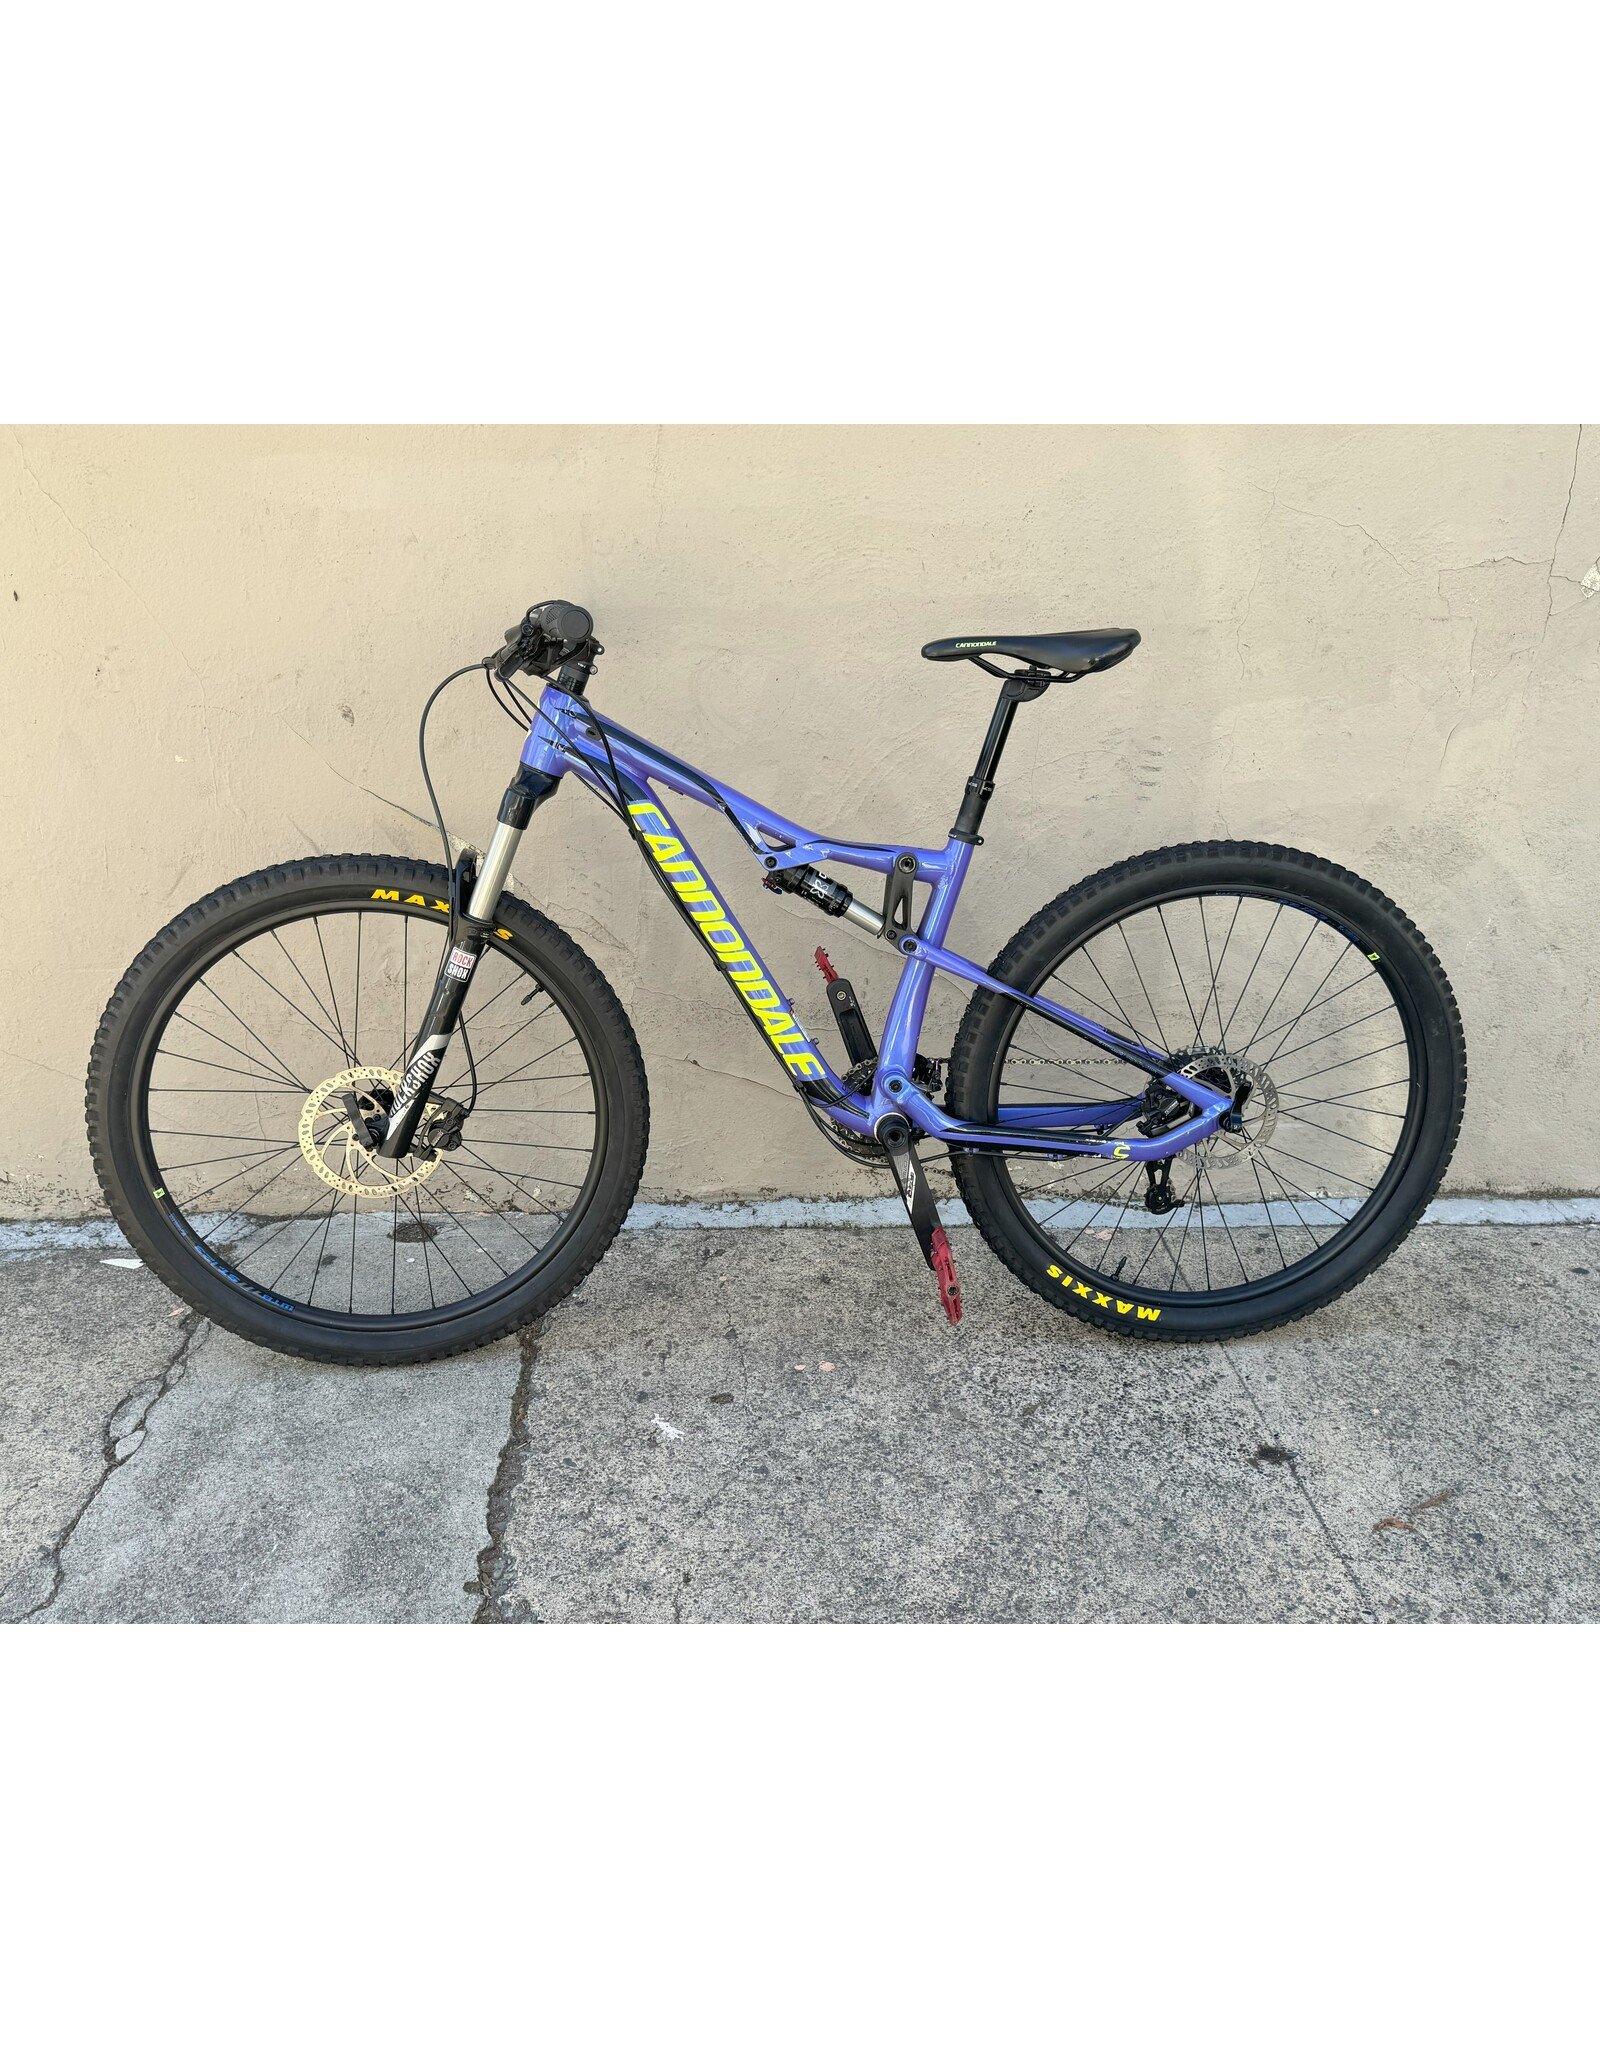 Cannondale Cannondale Habit 3, Hydraulic Disc, 18 Inches, 2017, Purple